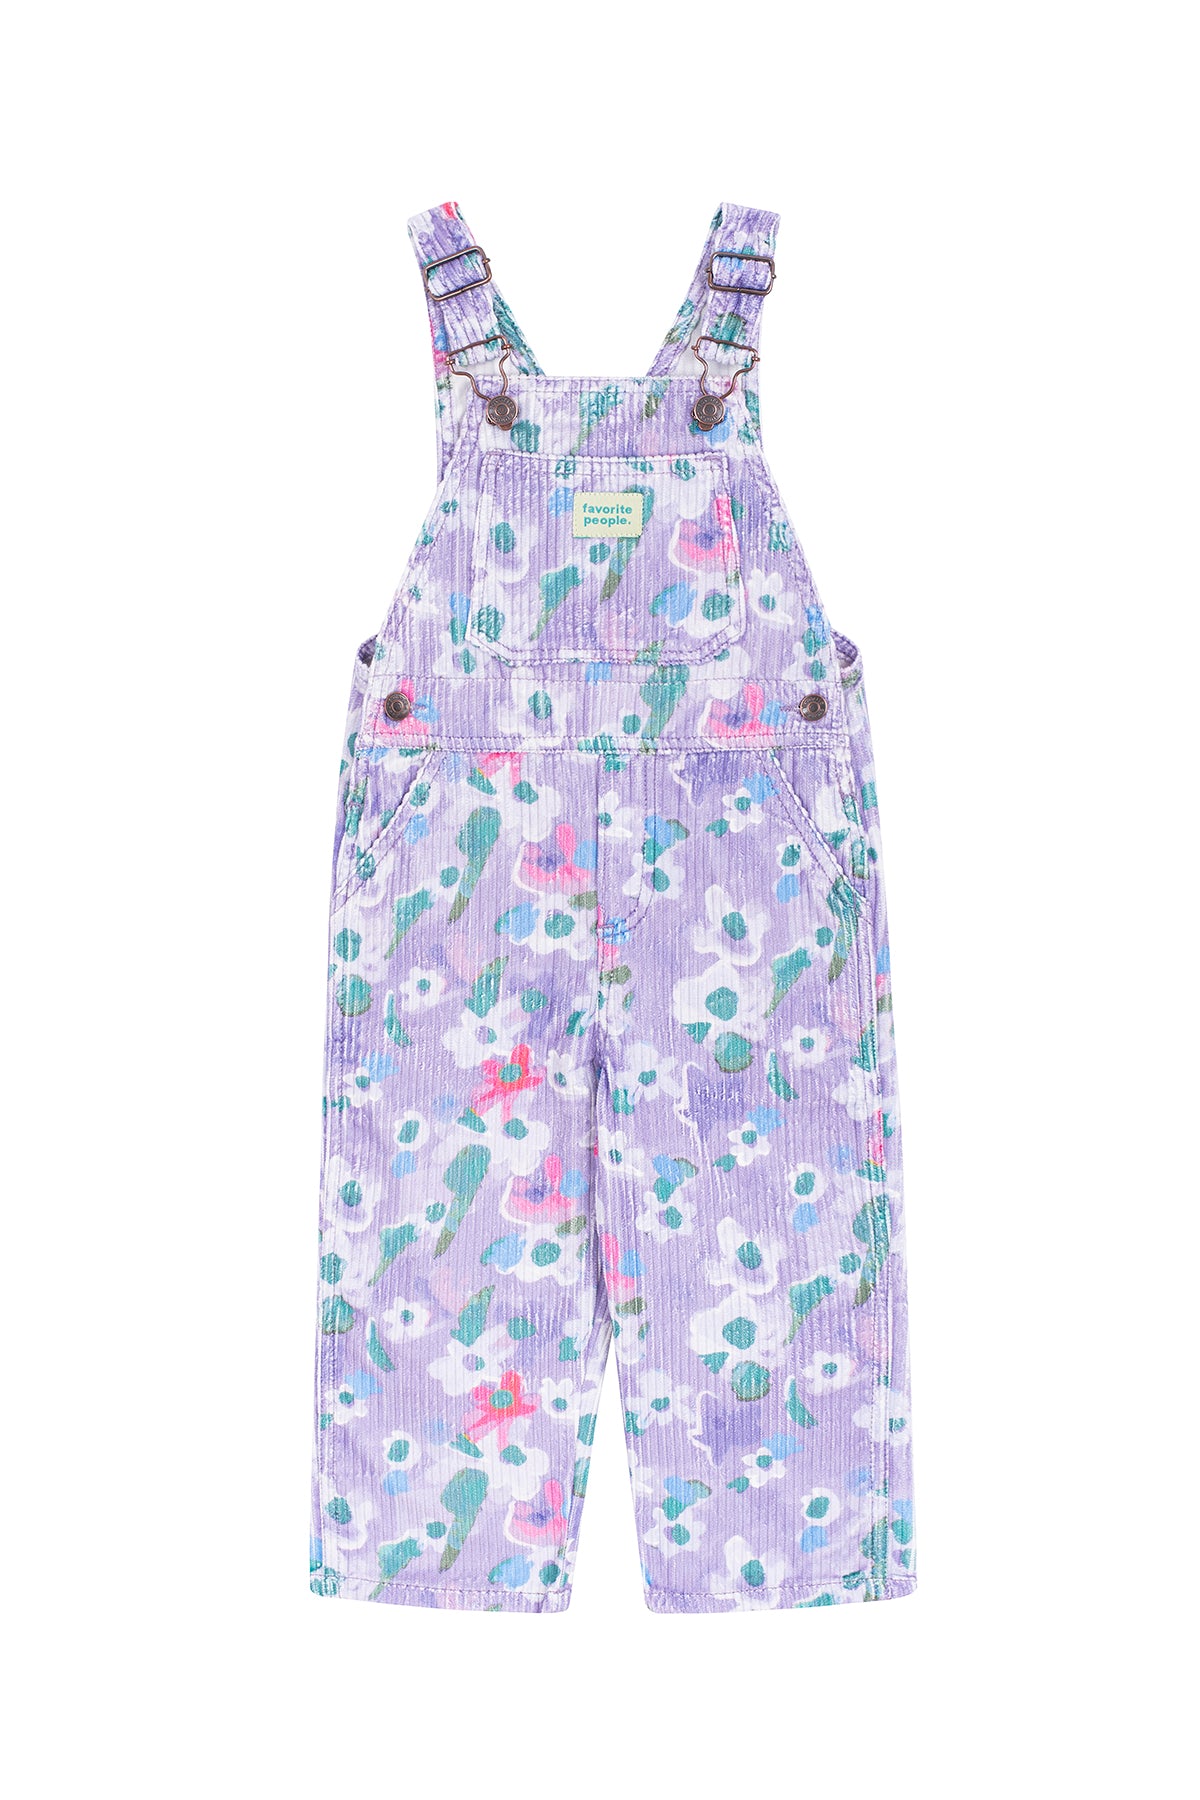 Mary Poppins Corduroy Overalls